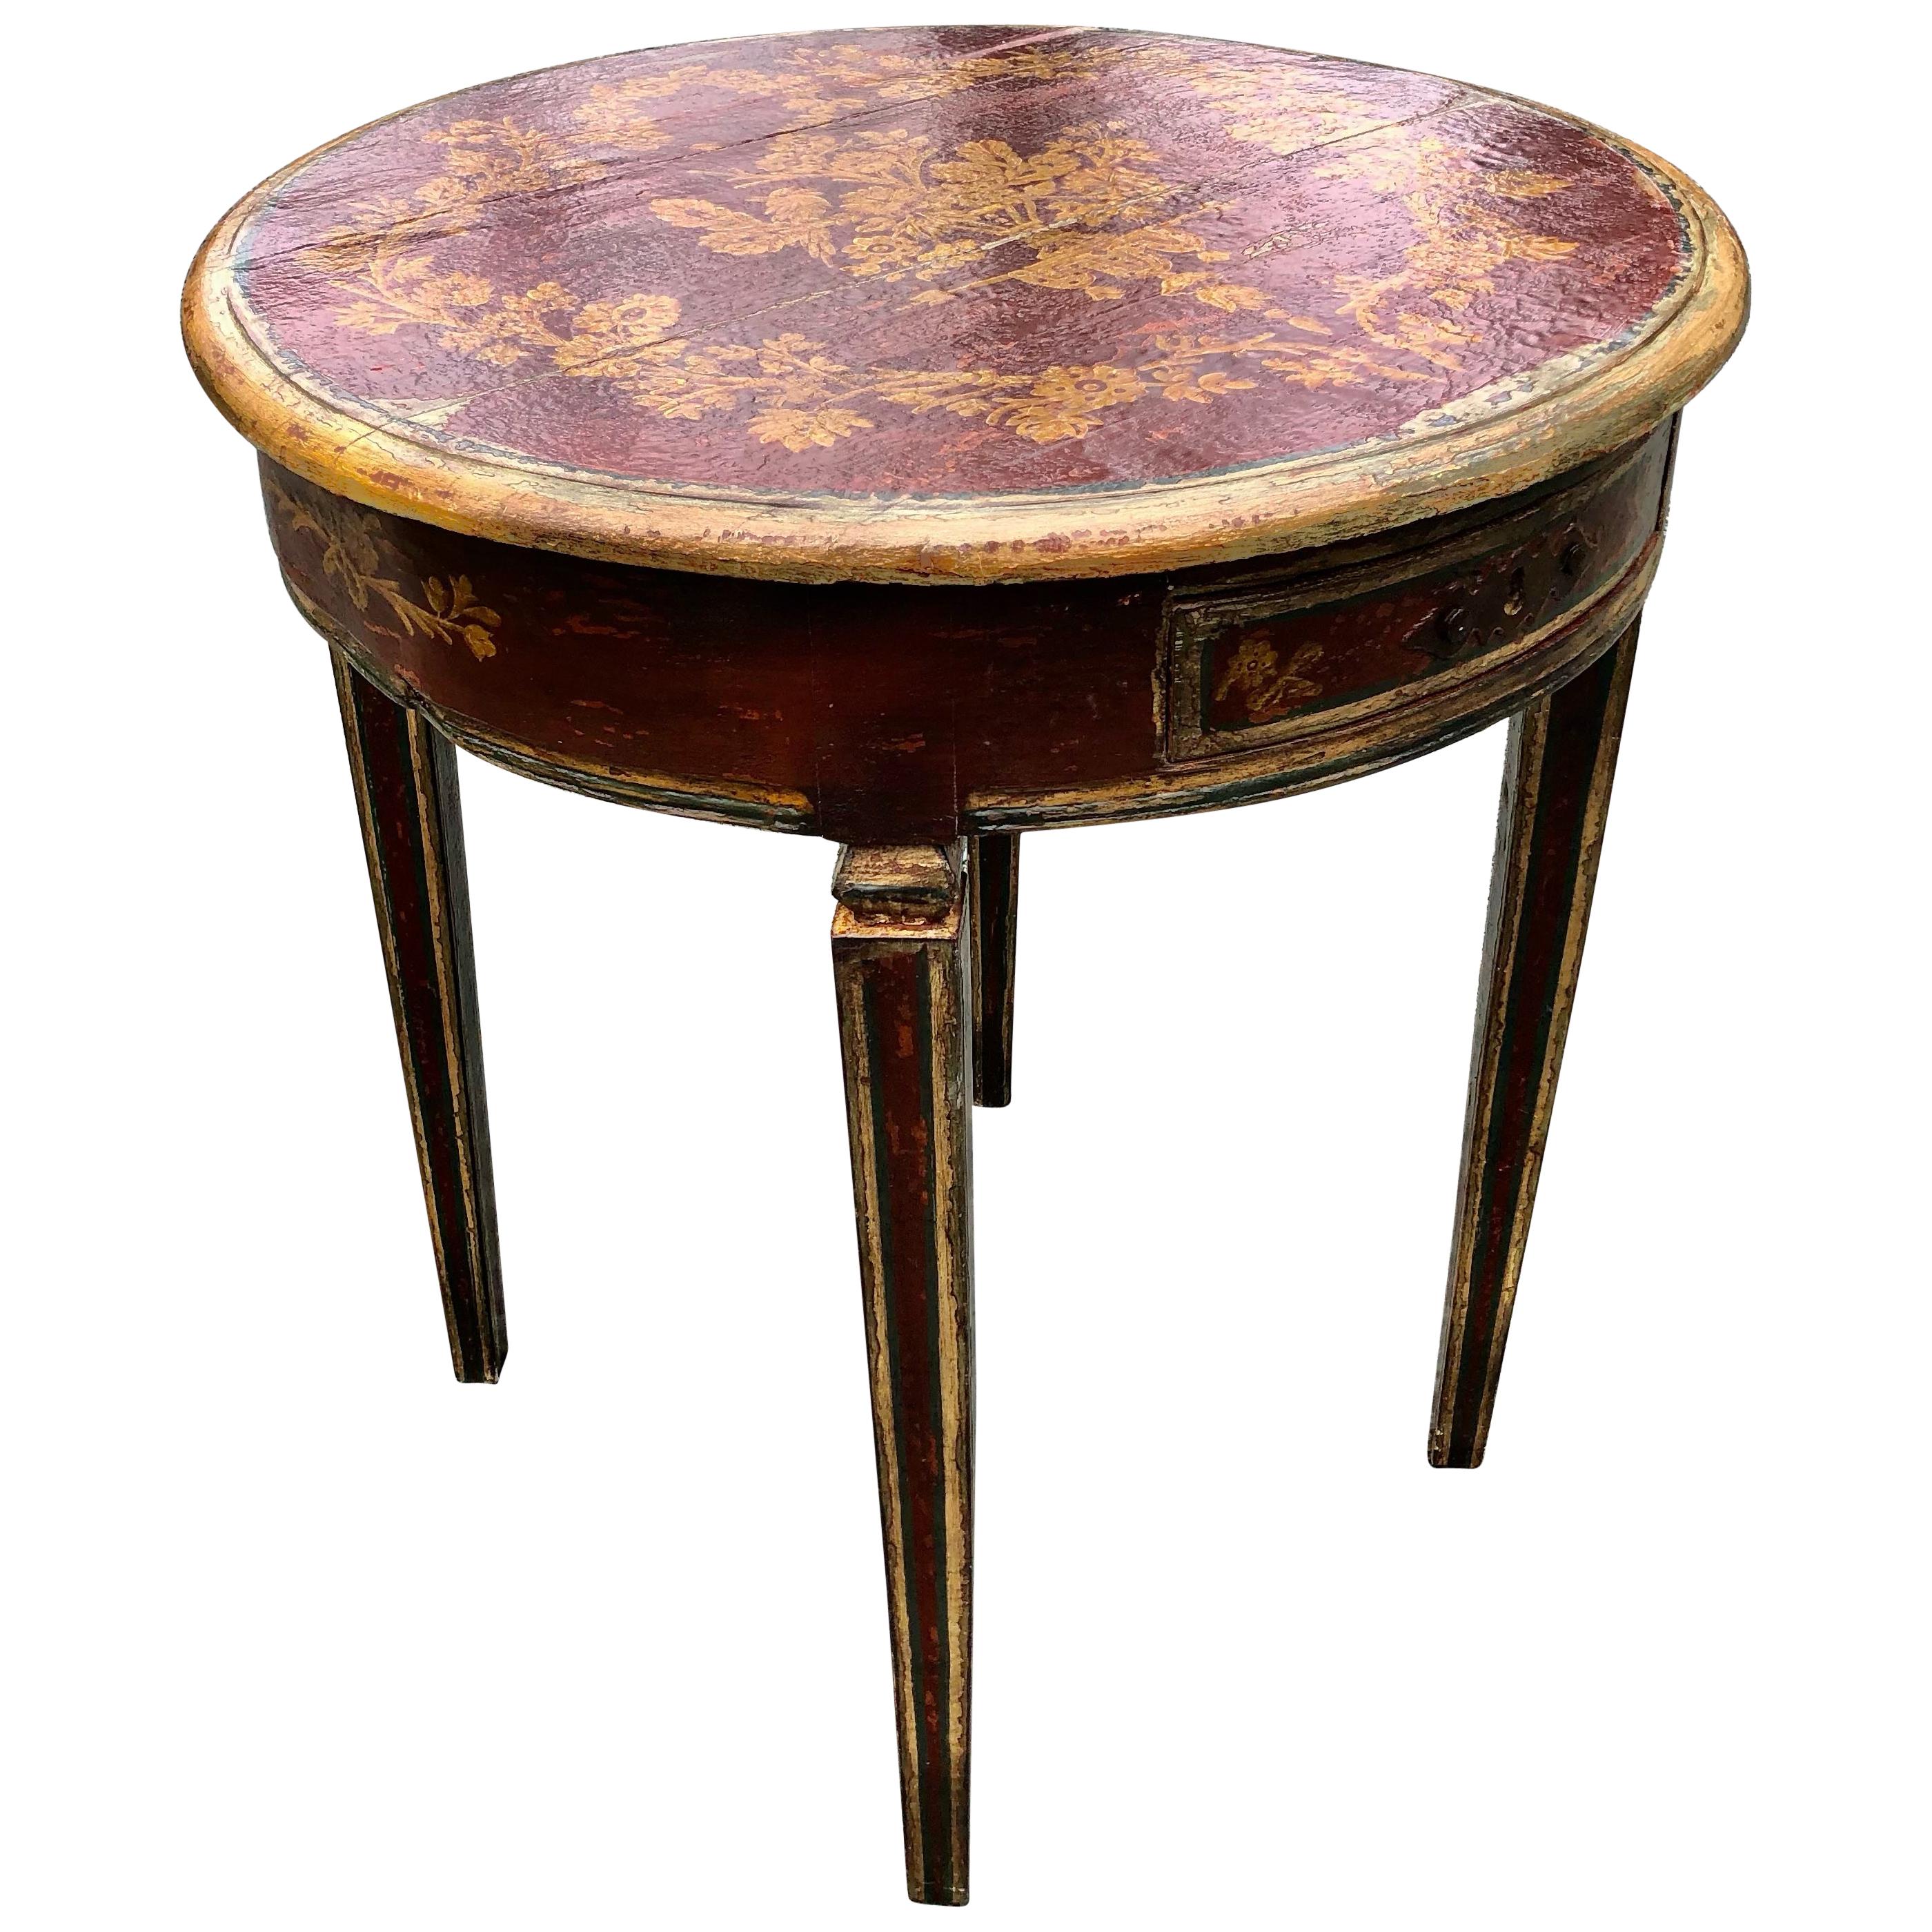 Lovely Italian Country Round Painted & Distressed Side Table